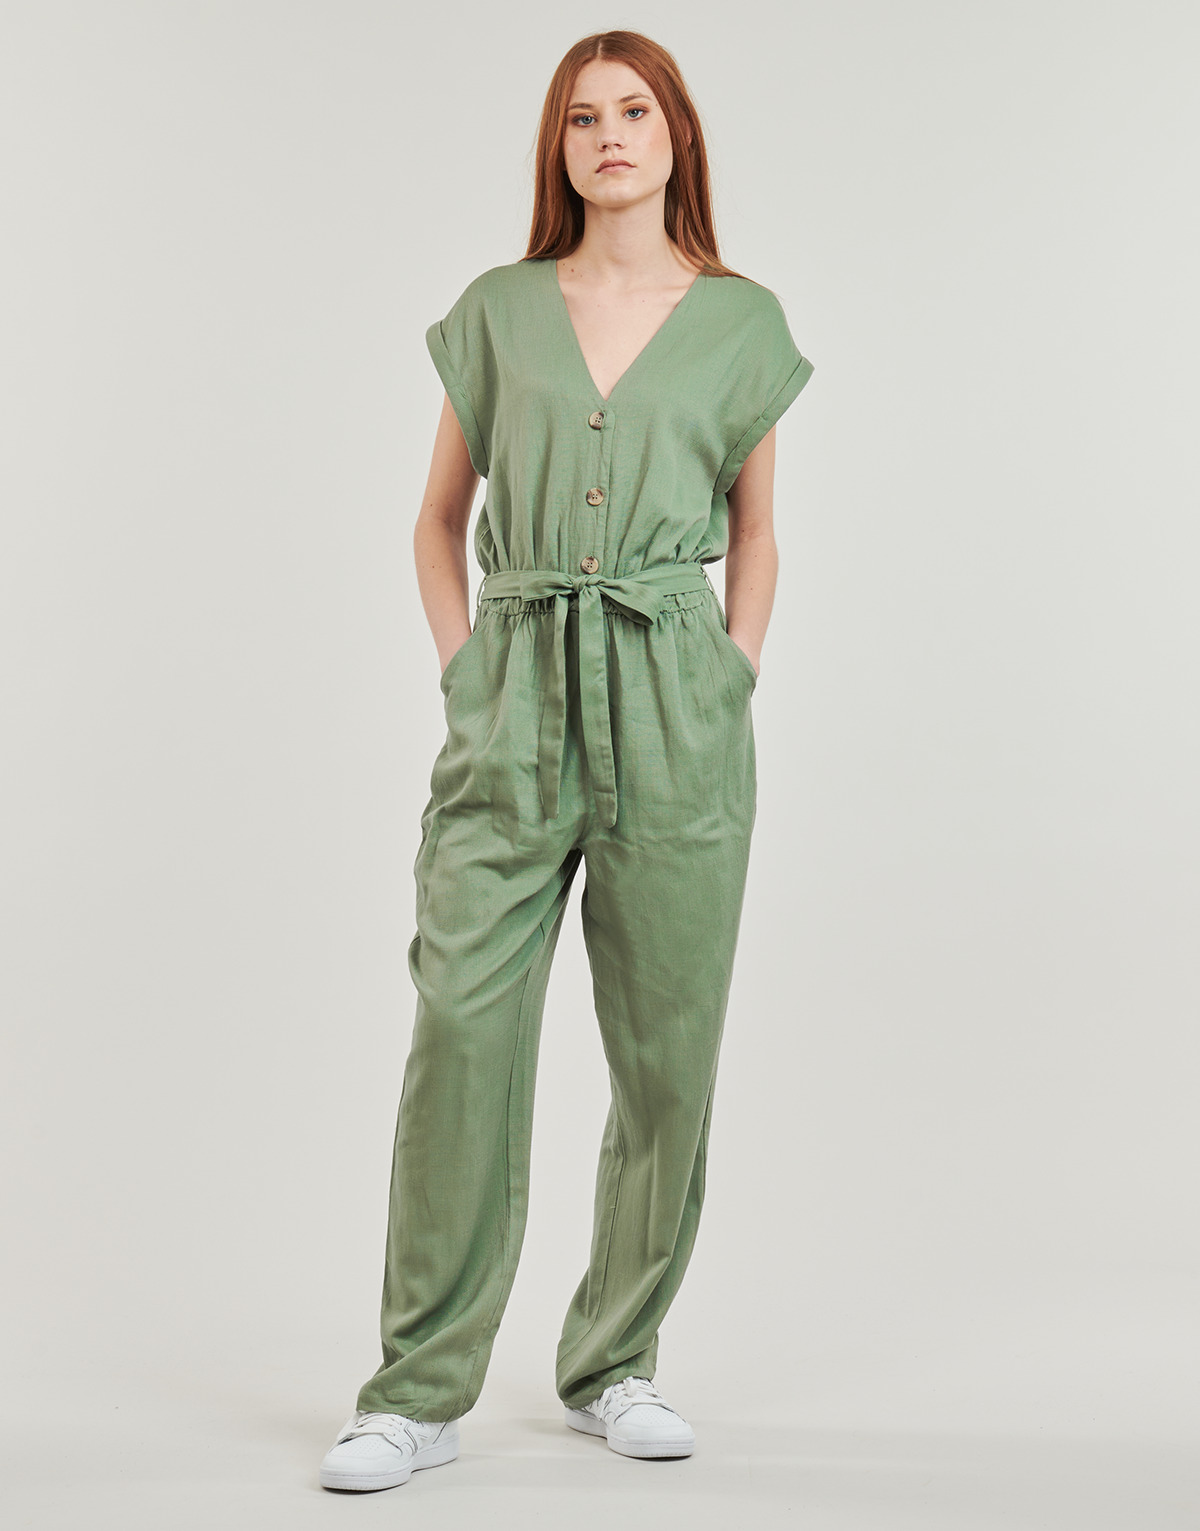 Clothing Women Jumpsuits / Dungarees Pieces PCMUNA Green